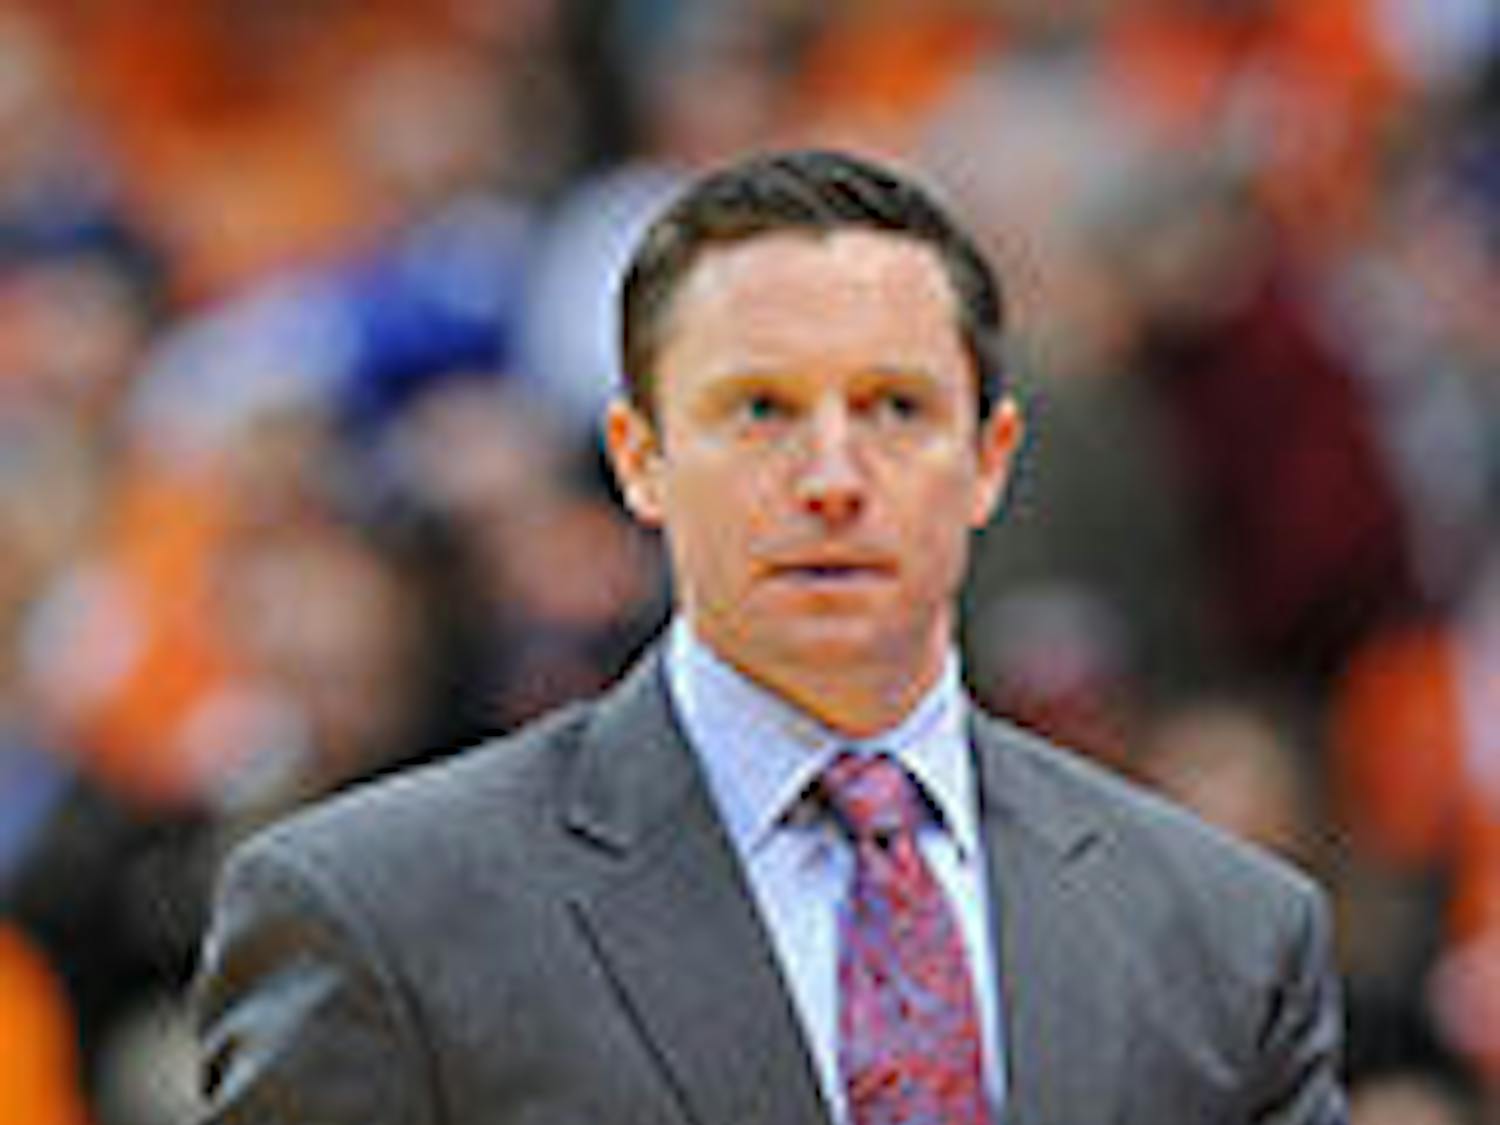 Michael White, 38, was hired by the University of Florida to be the next head coach of the Gators men's basketball team, athletics director Jeremy Foley announced Thursday. White replaces former coach Billy Donovan, who left UF after 19 seasons to become the new head coach of the NBA's Oklahoma City Thunder.&nbsp;